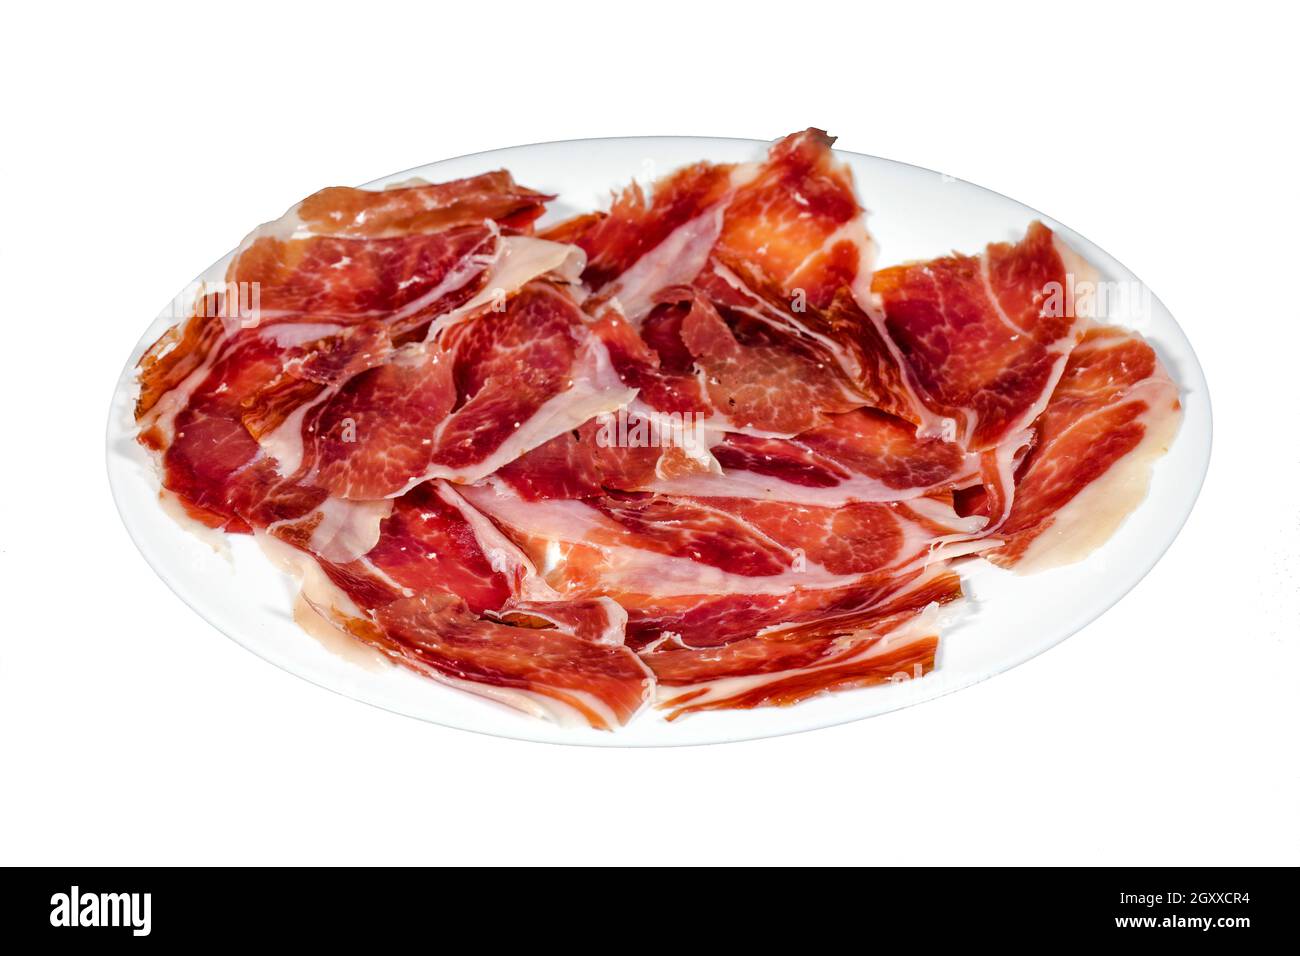 Serrano ham, ham, typical and delicious Spanish food, isolated background on white. Selective focus foreground Stock Photo